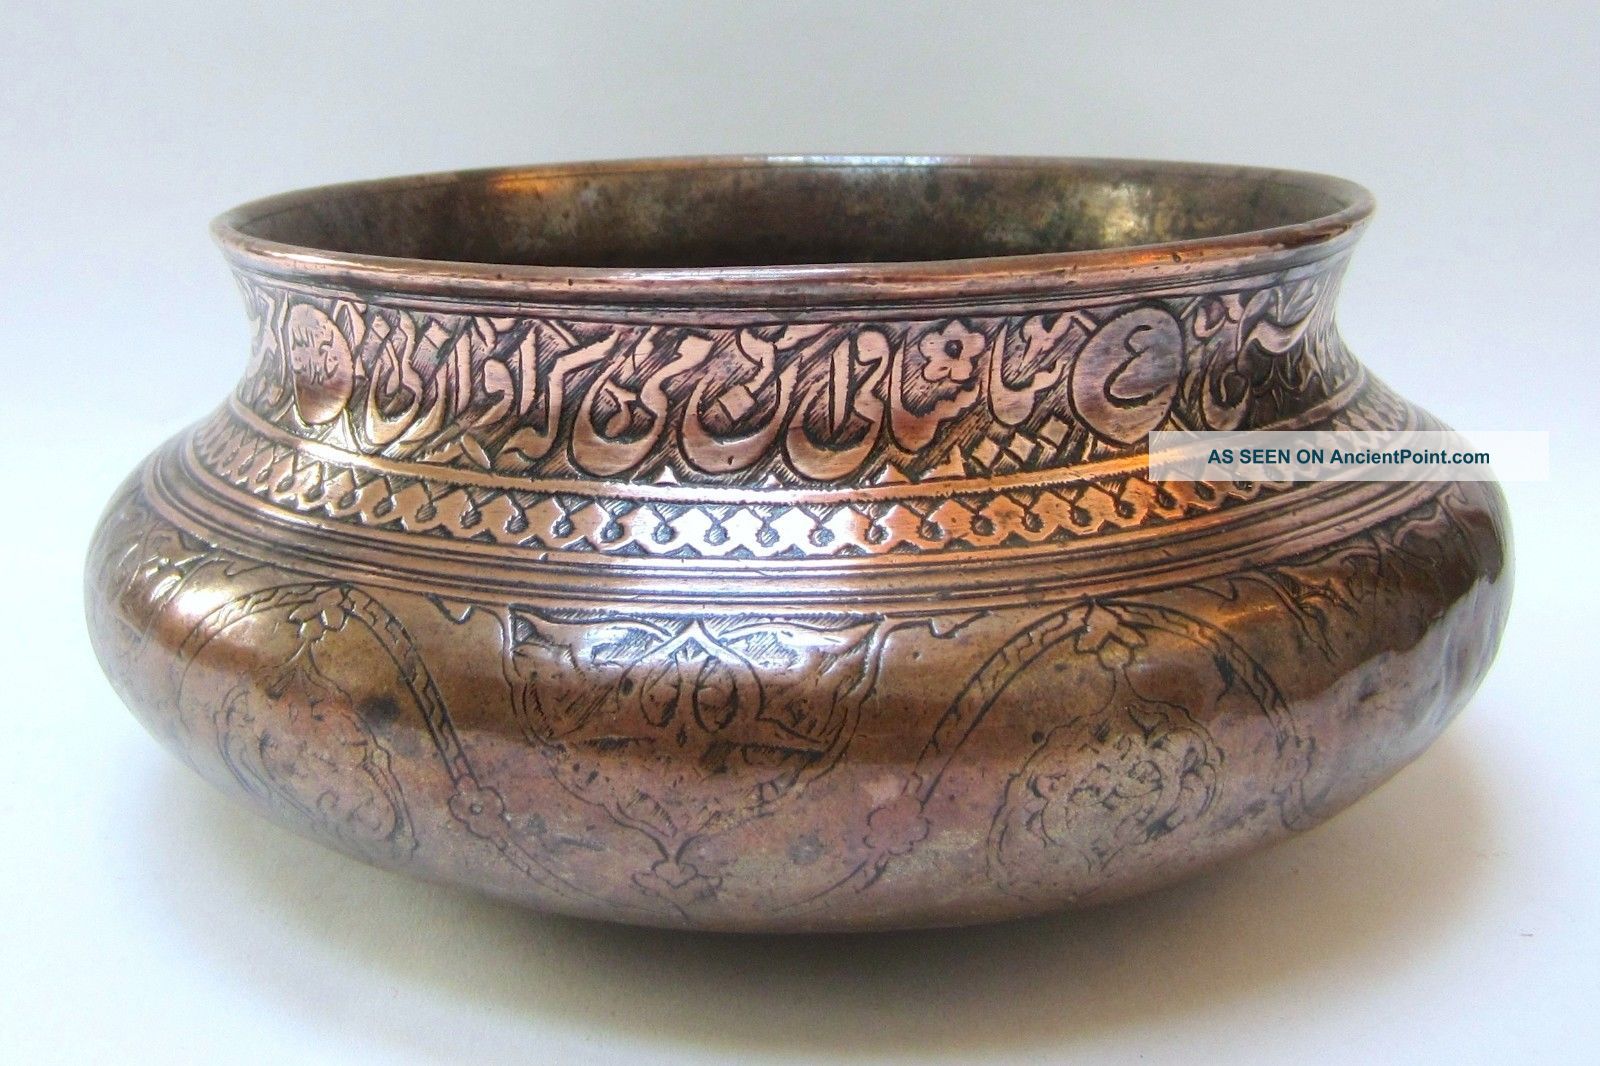 17th C Persian Safavid Copper Bowl - Signed &dated:1636 - Islamic/middle East Middle East photo